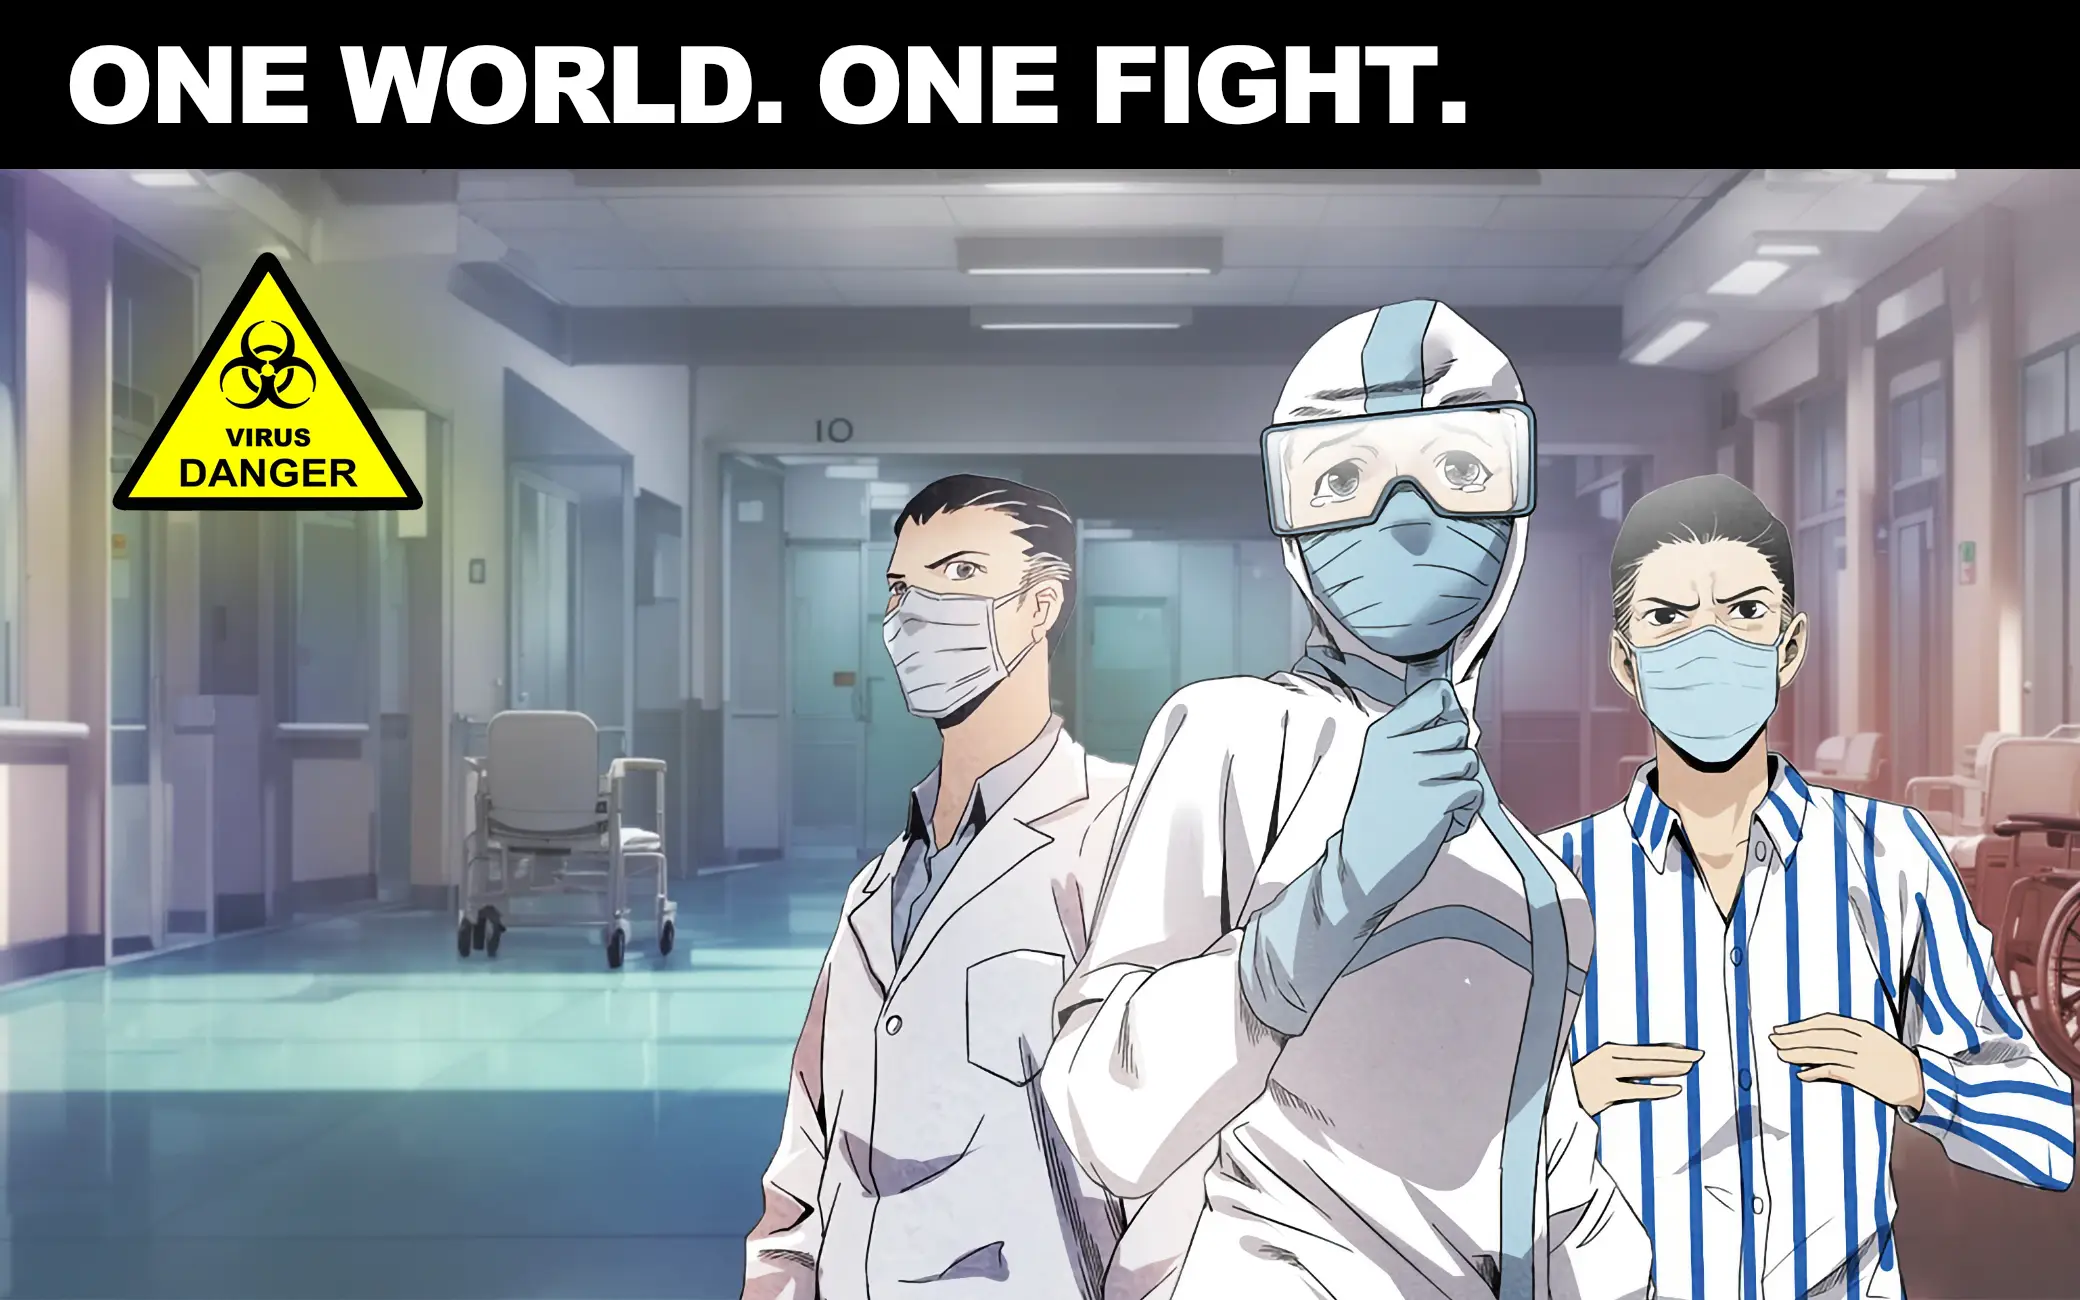 One World. One Fight.